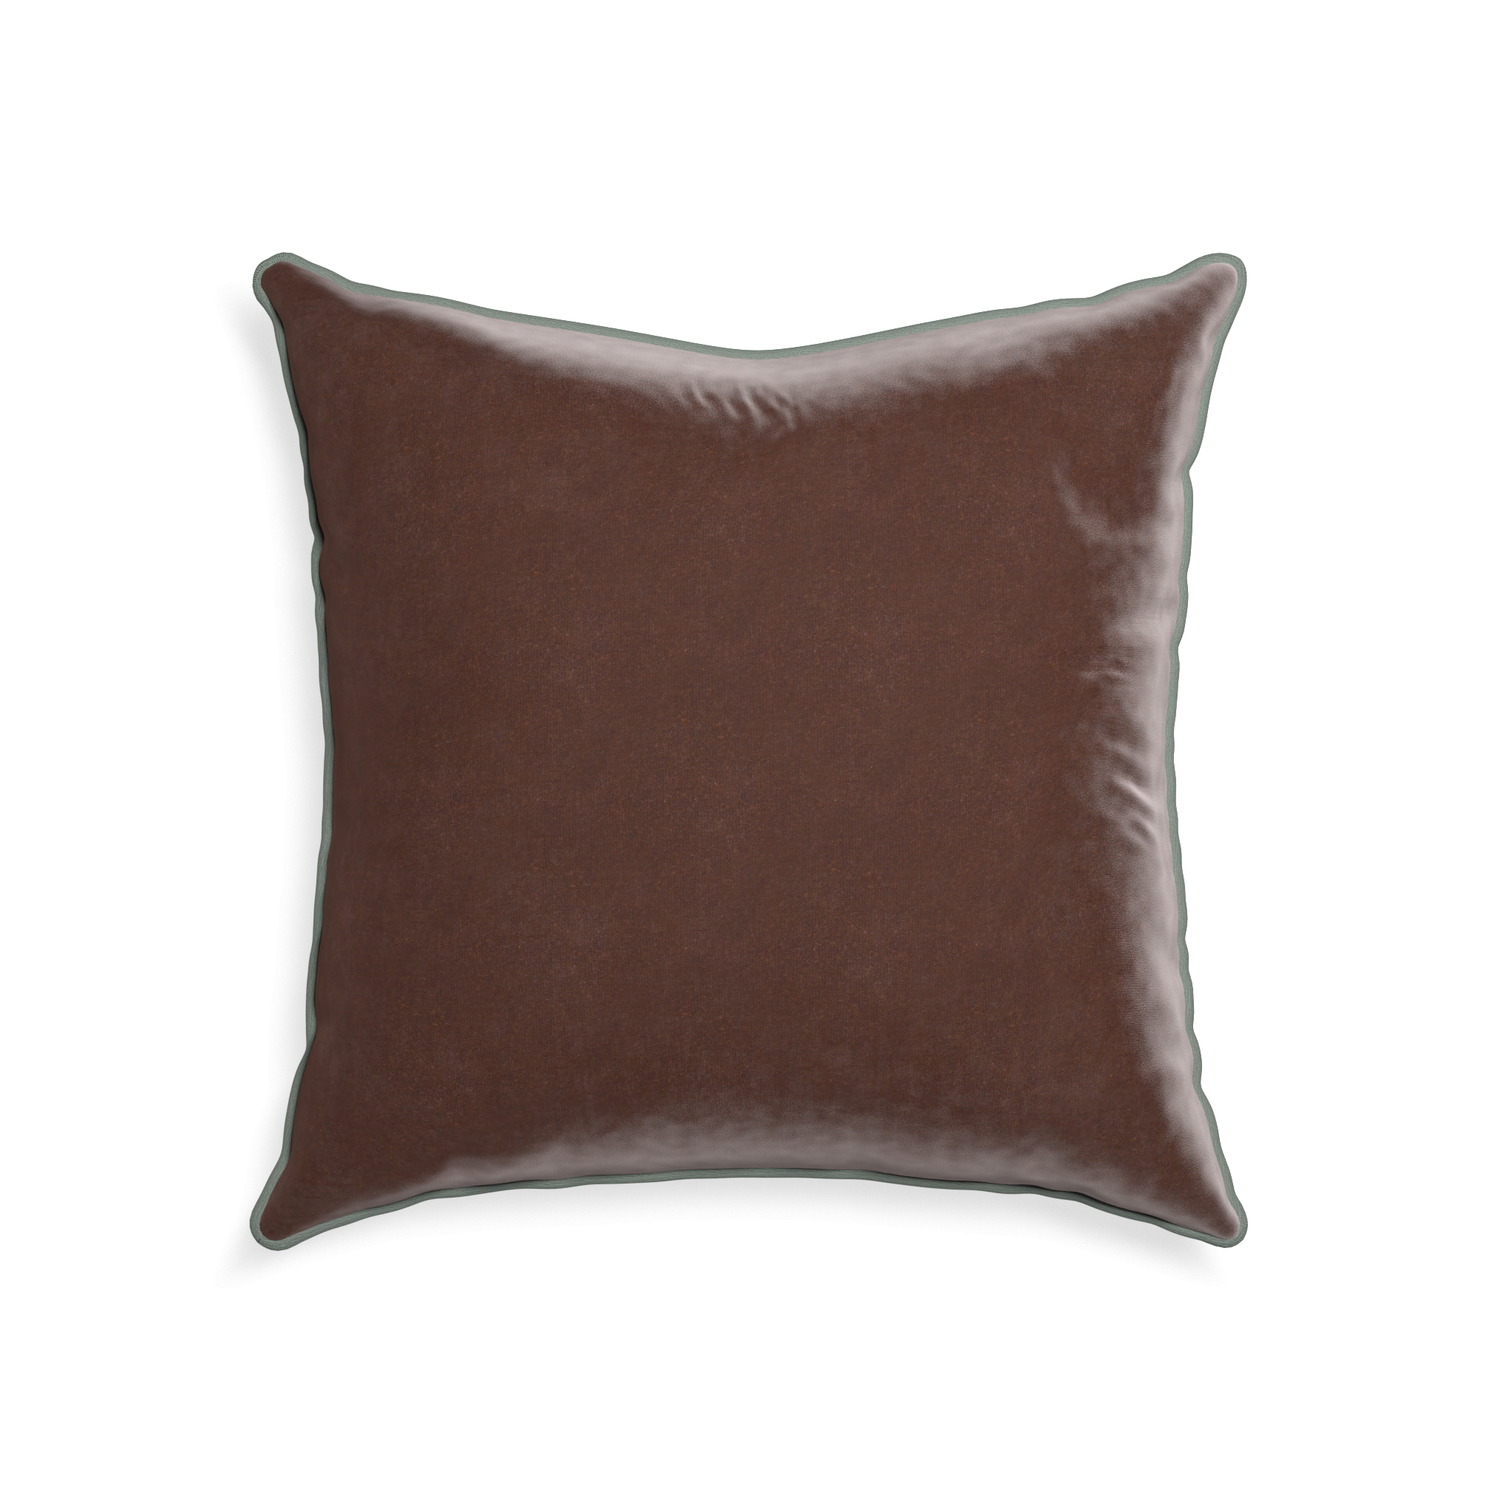 22-square walnut velvet custom brownpillow with sage piping on white background